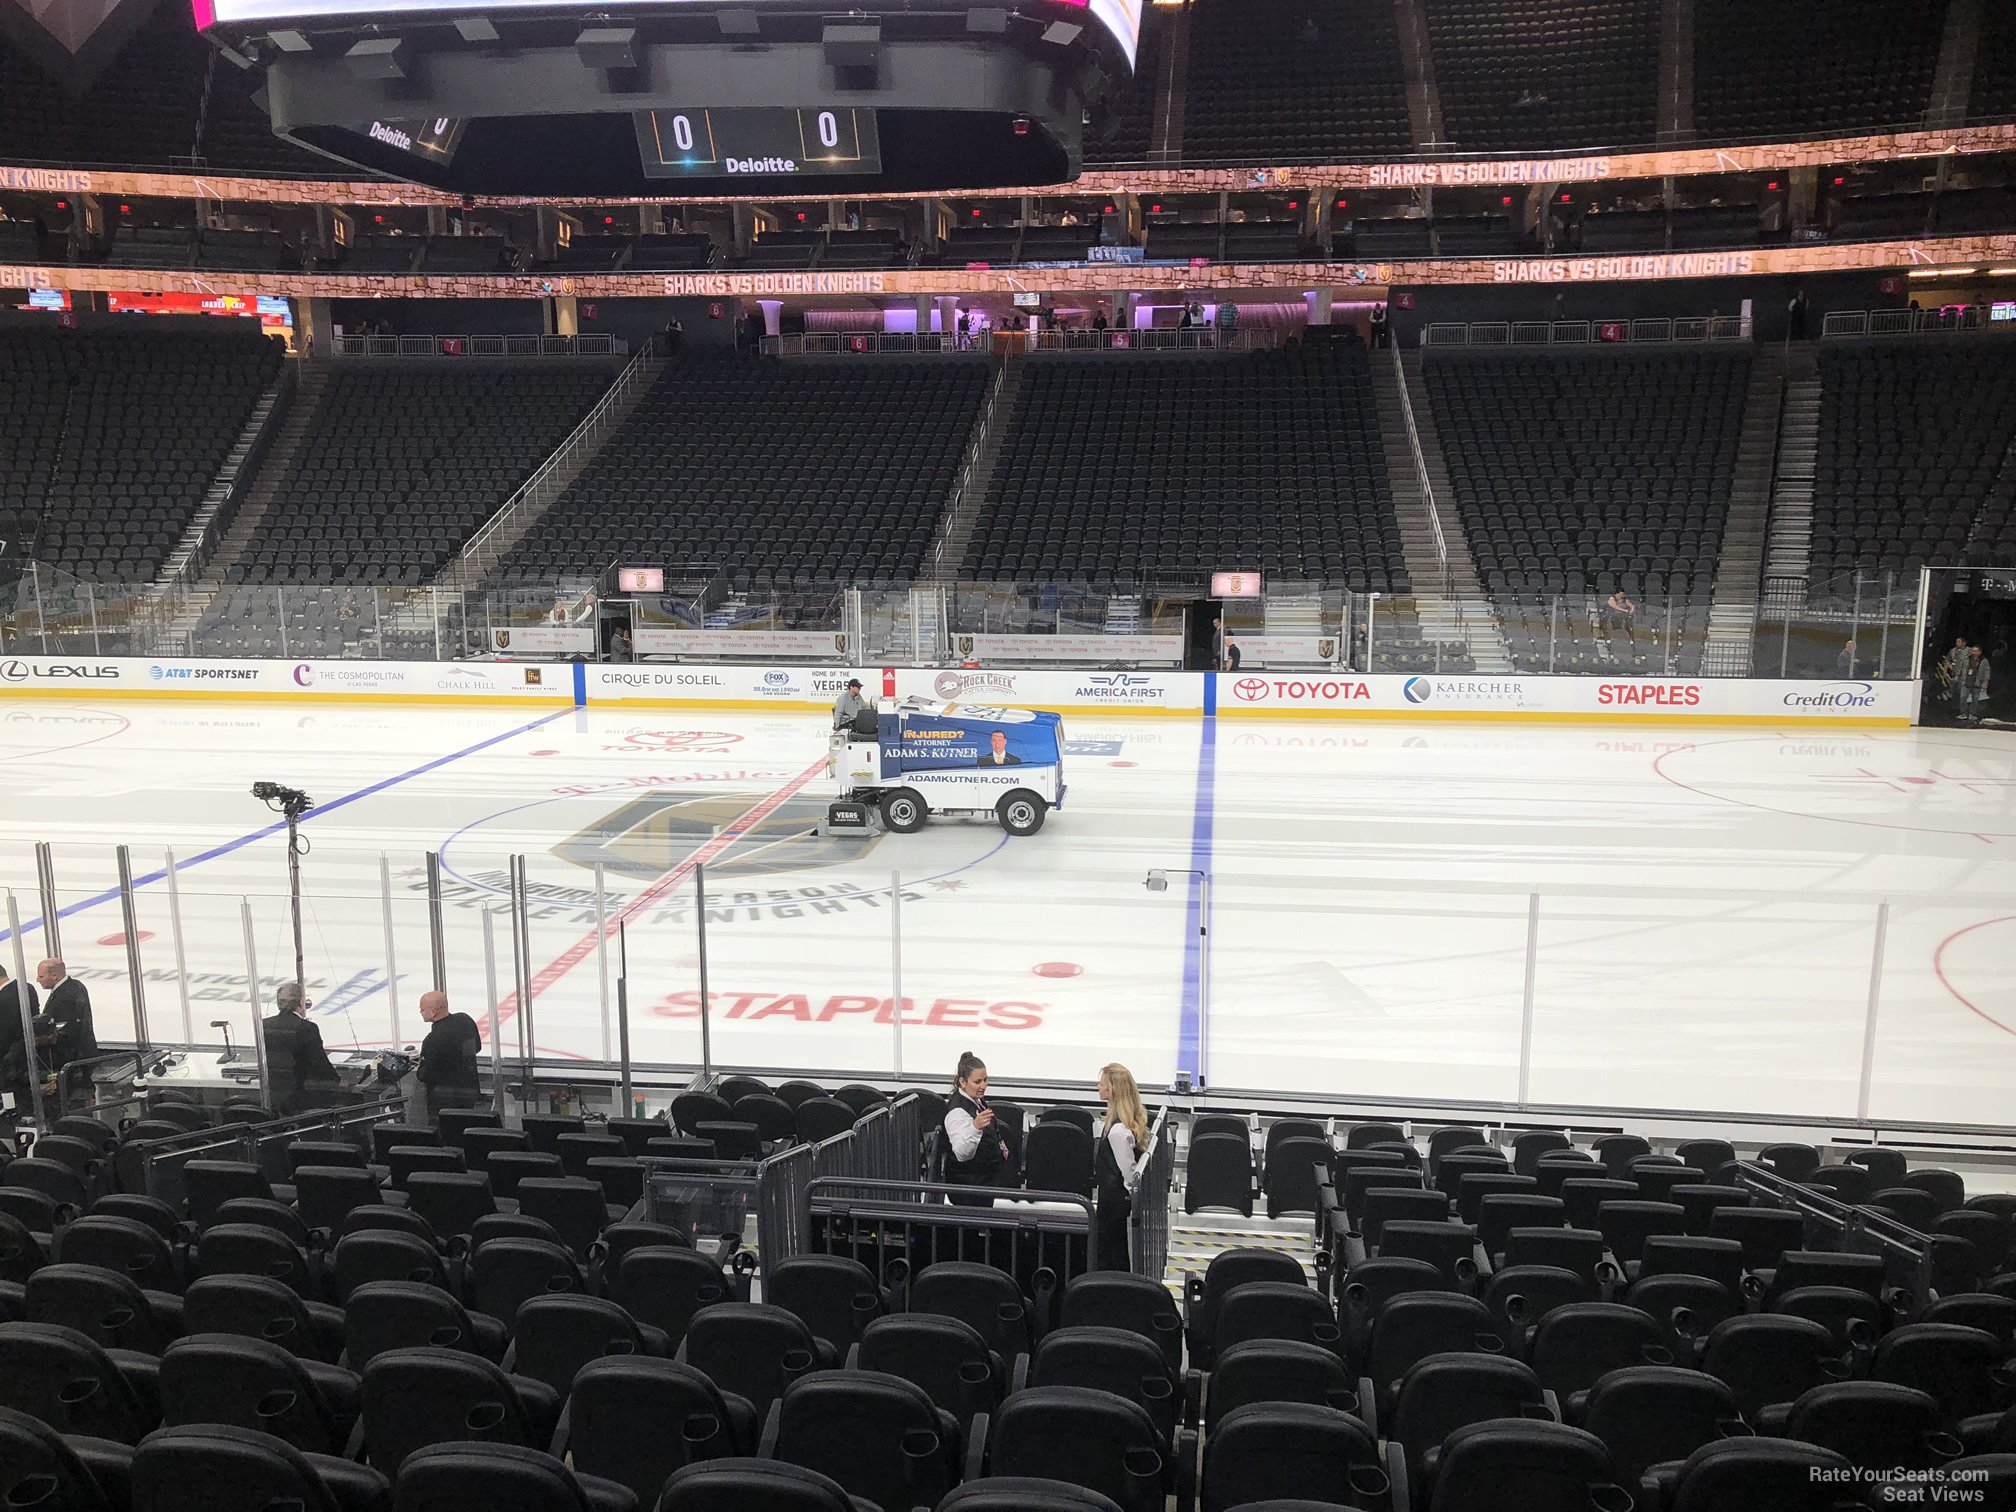 T Mobile Arena Seating Chart Hockey